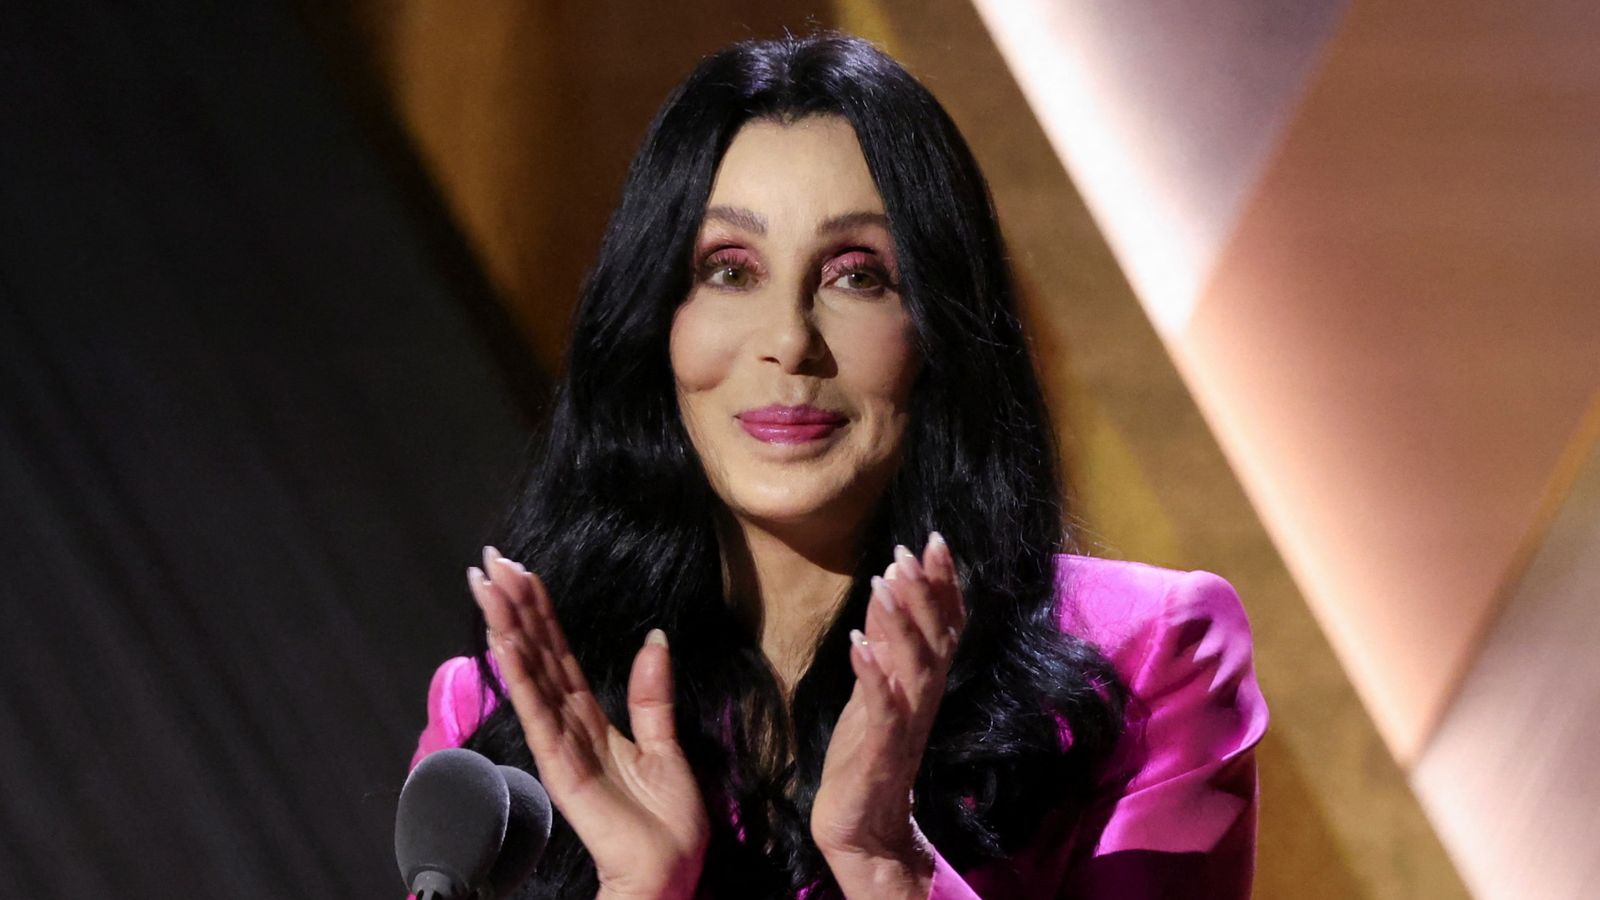 Cher files for conservatorship of her youngest son over fears about his drug abuse - reports